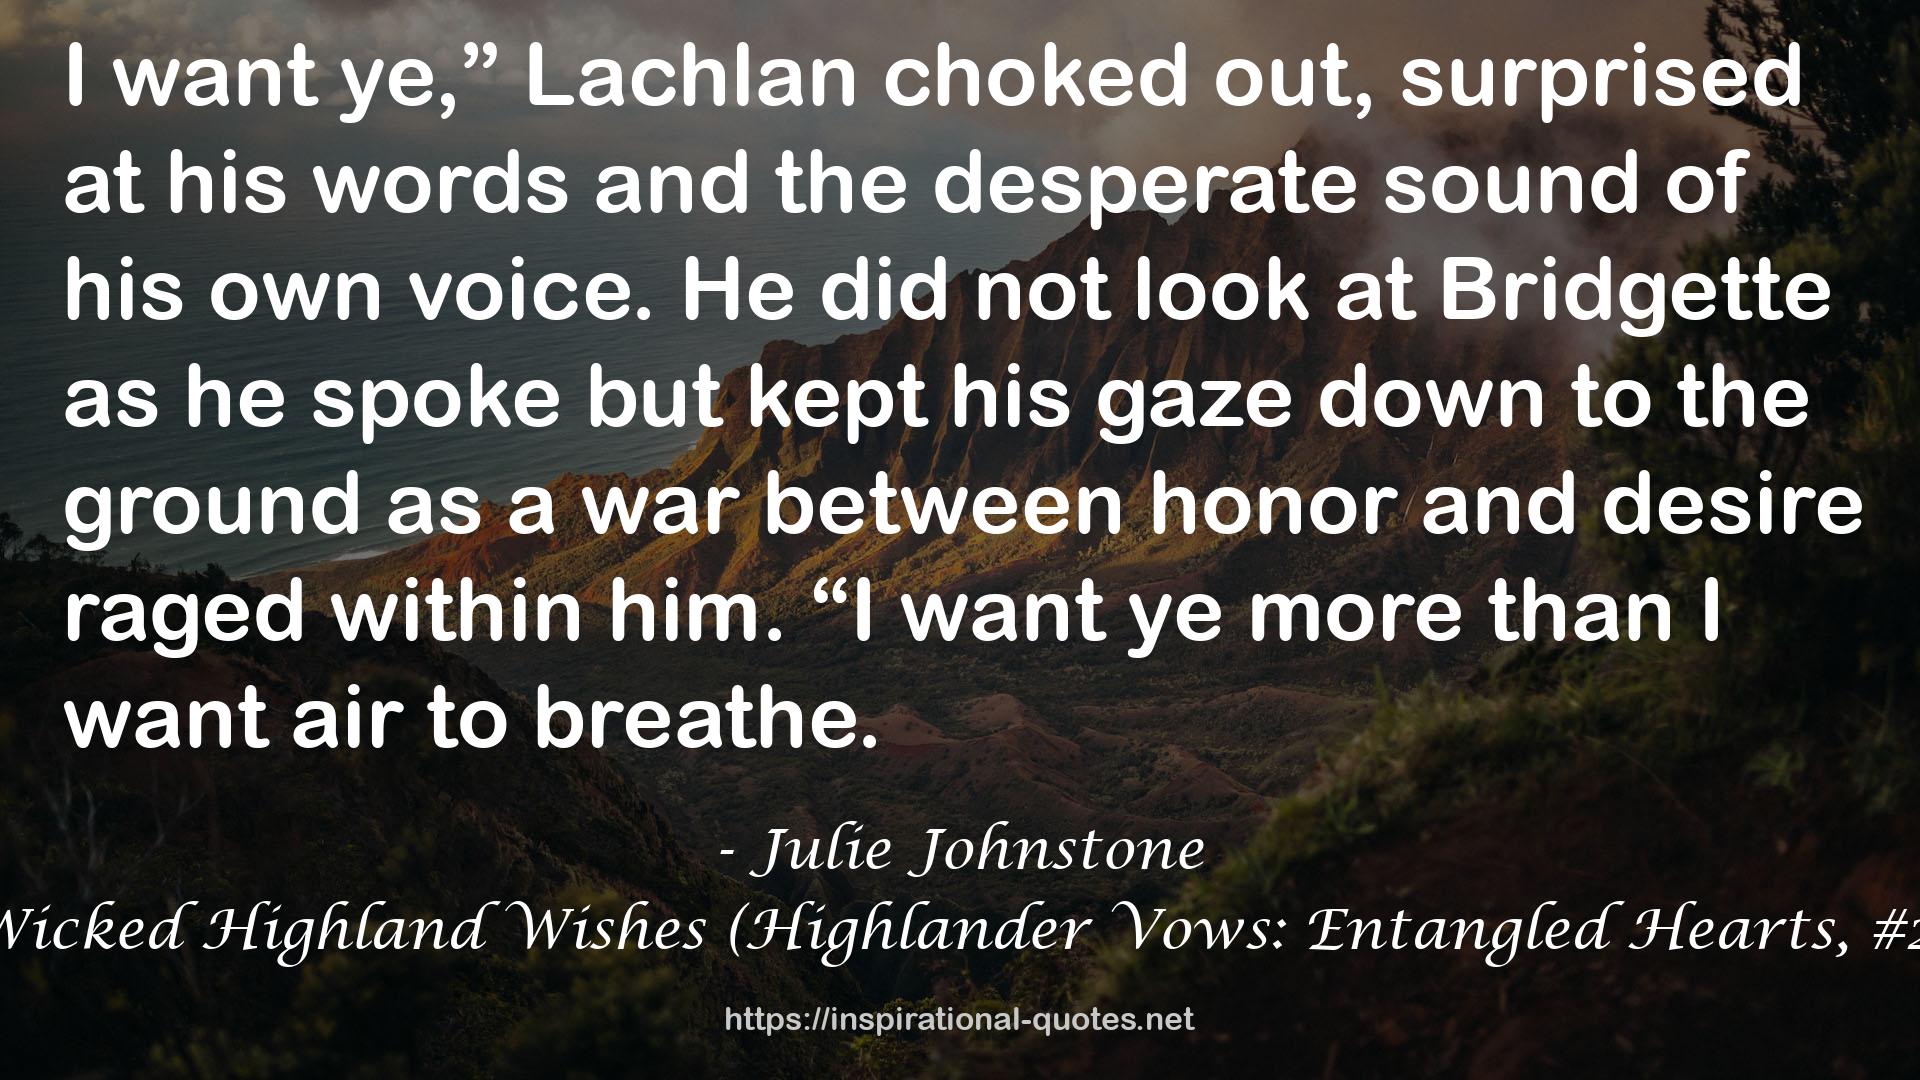 Wicked Highland Wishes (Highlander Vows: Entangled Hearts, #2) QUOTES